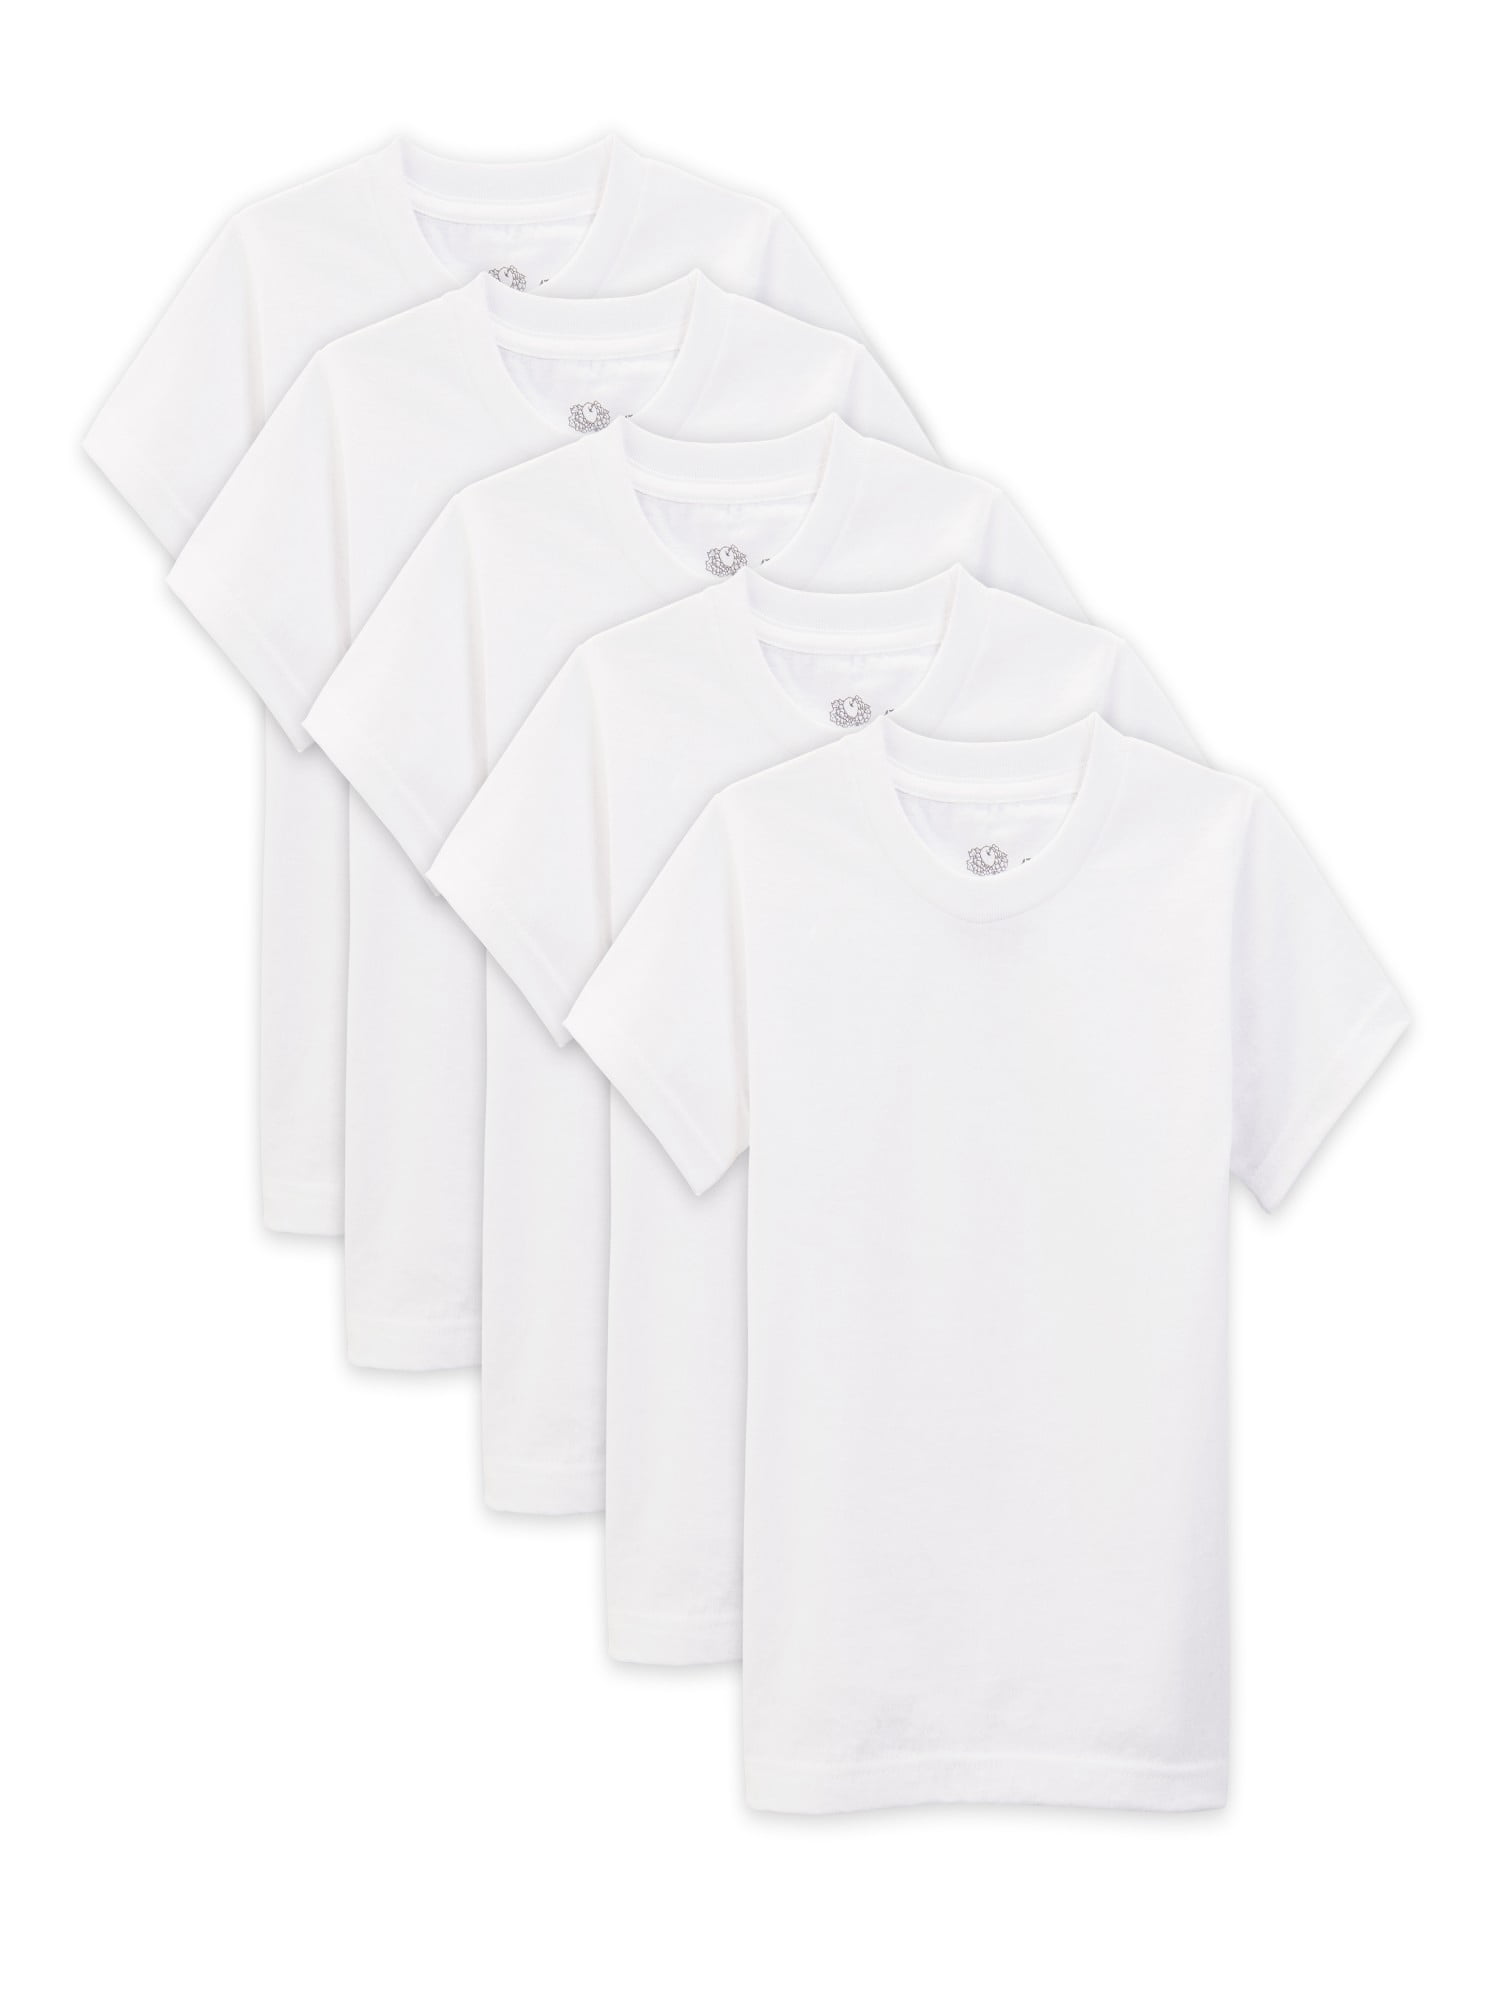 Fruit of the Loom Toddler Boy Crew Undershirts, 5 Pack, Sizes 2T-5T ...